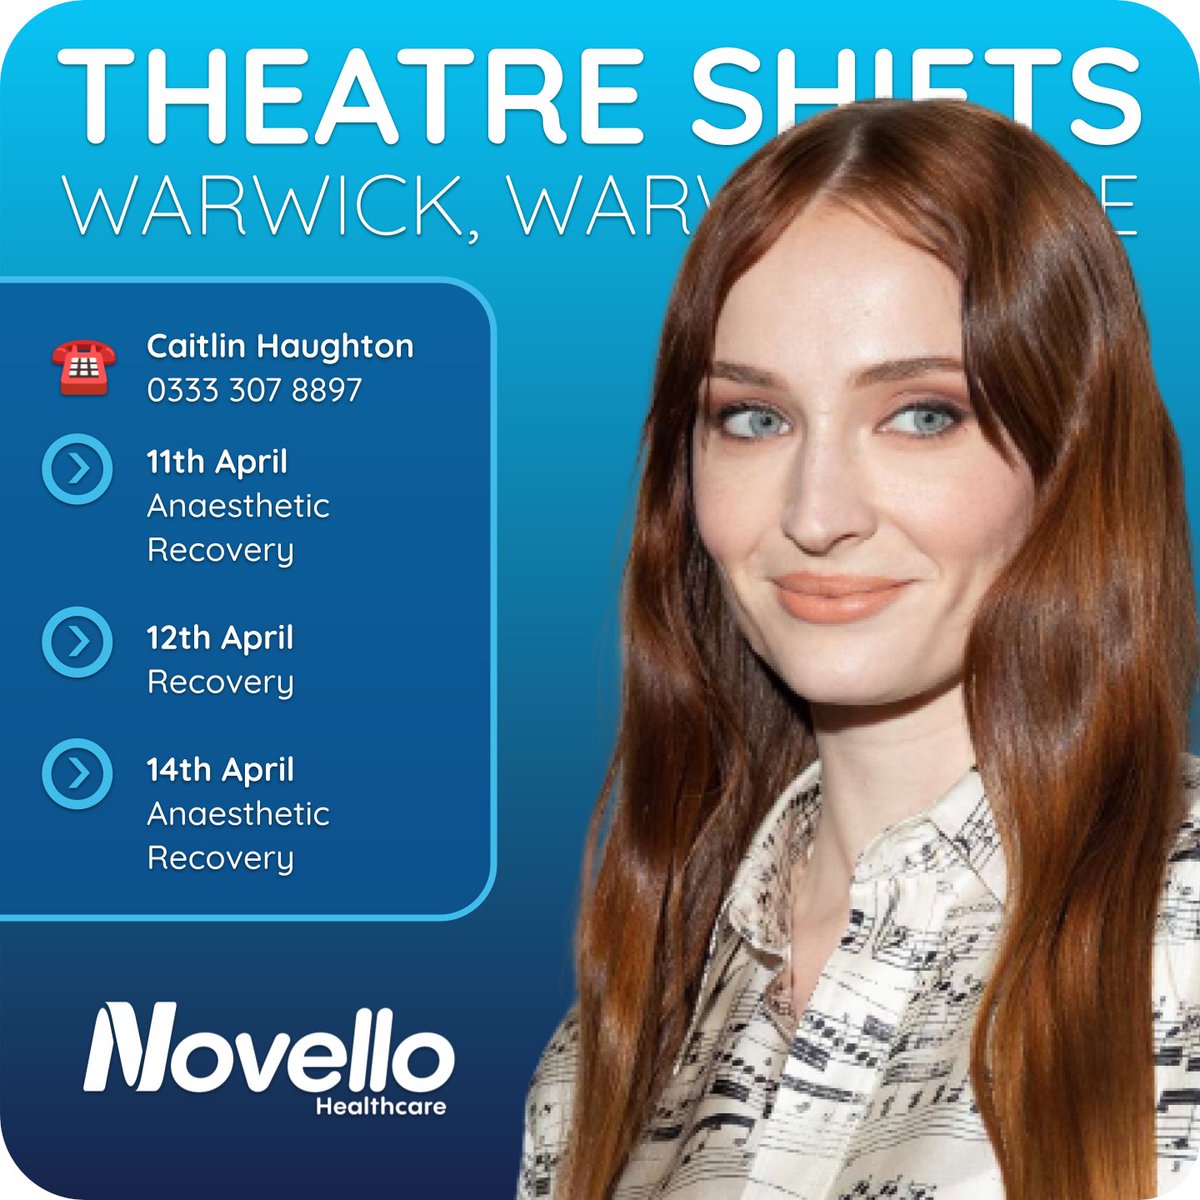 THEATRE SHIFTS IN WARWICK!

To book call Caitlin Haughton on 0333 307 8897

See 150+ locations on our website: novellohealthcare.com/Locations/ 

Pictured: Warwick-raised actress Sophie Jonas, Stansa Stark in Game of Thrones amongst many others.

#warwickjobs #sophieturner #twitternurses